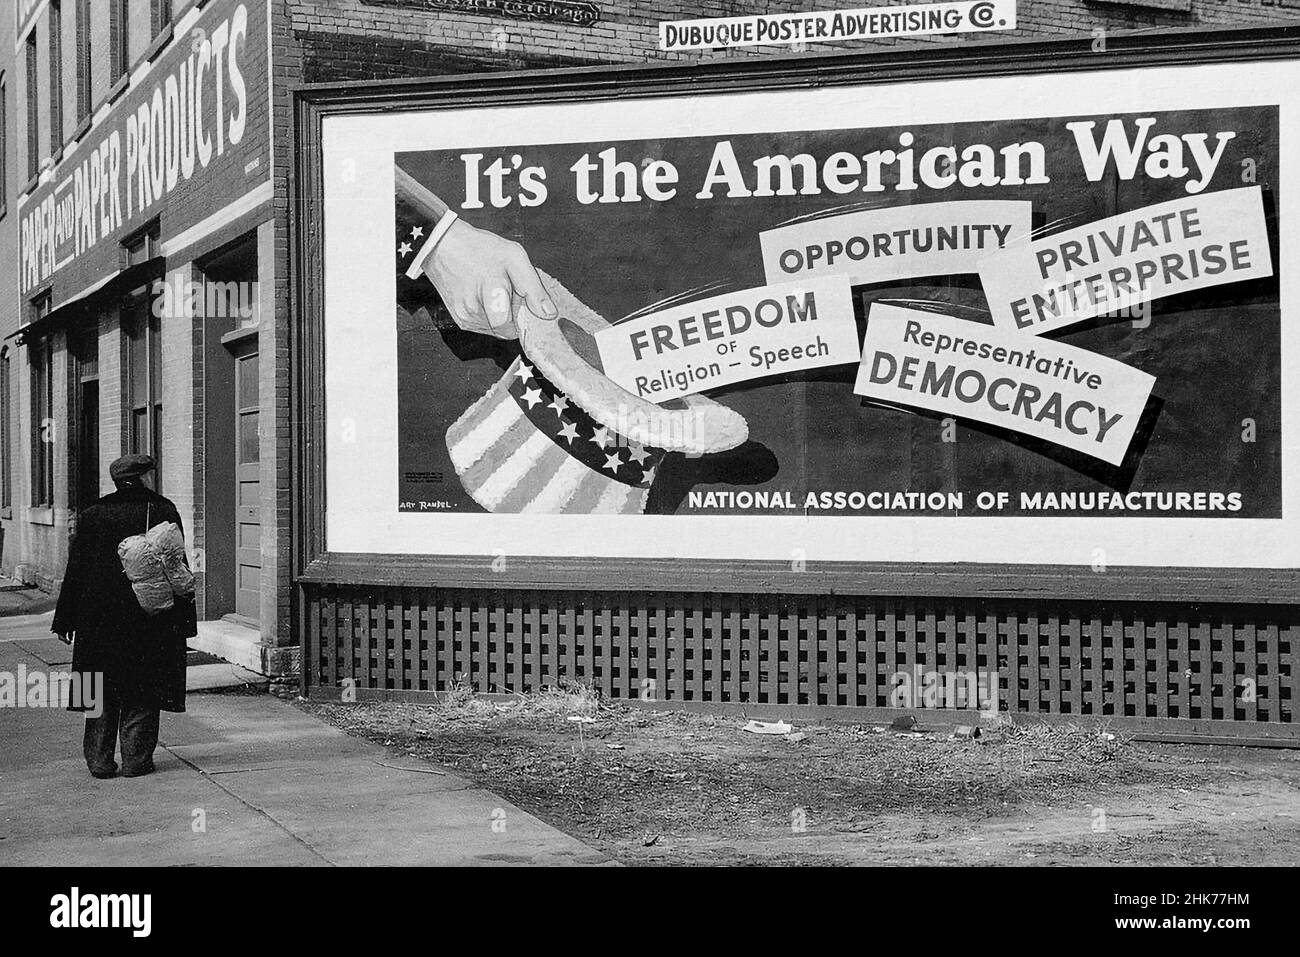 ‘AMERICAN WAY’ LIFESTYLE CONTRAST USA Rich & Poor Archive 1940s American contrasts in lifestyle  'Its the American Way' National Association of Manufacturers signboard, with down on his luck man passing by in Dubuque, Iowa, USA April 1940 Stock Photo